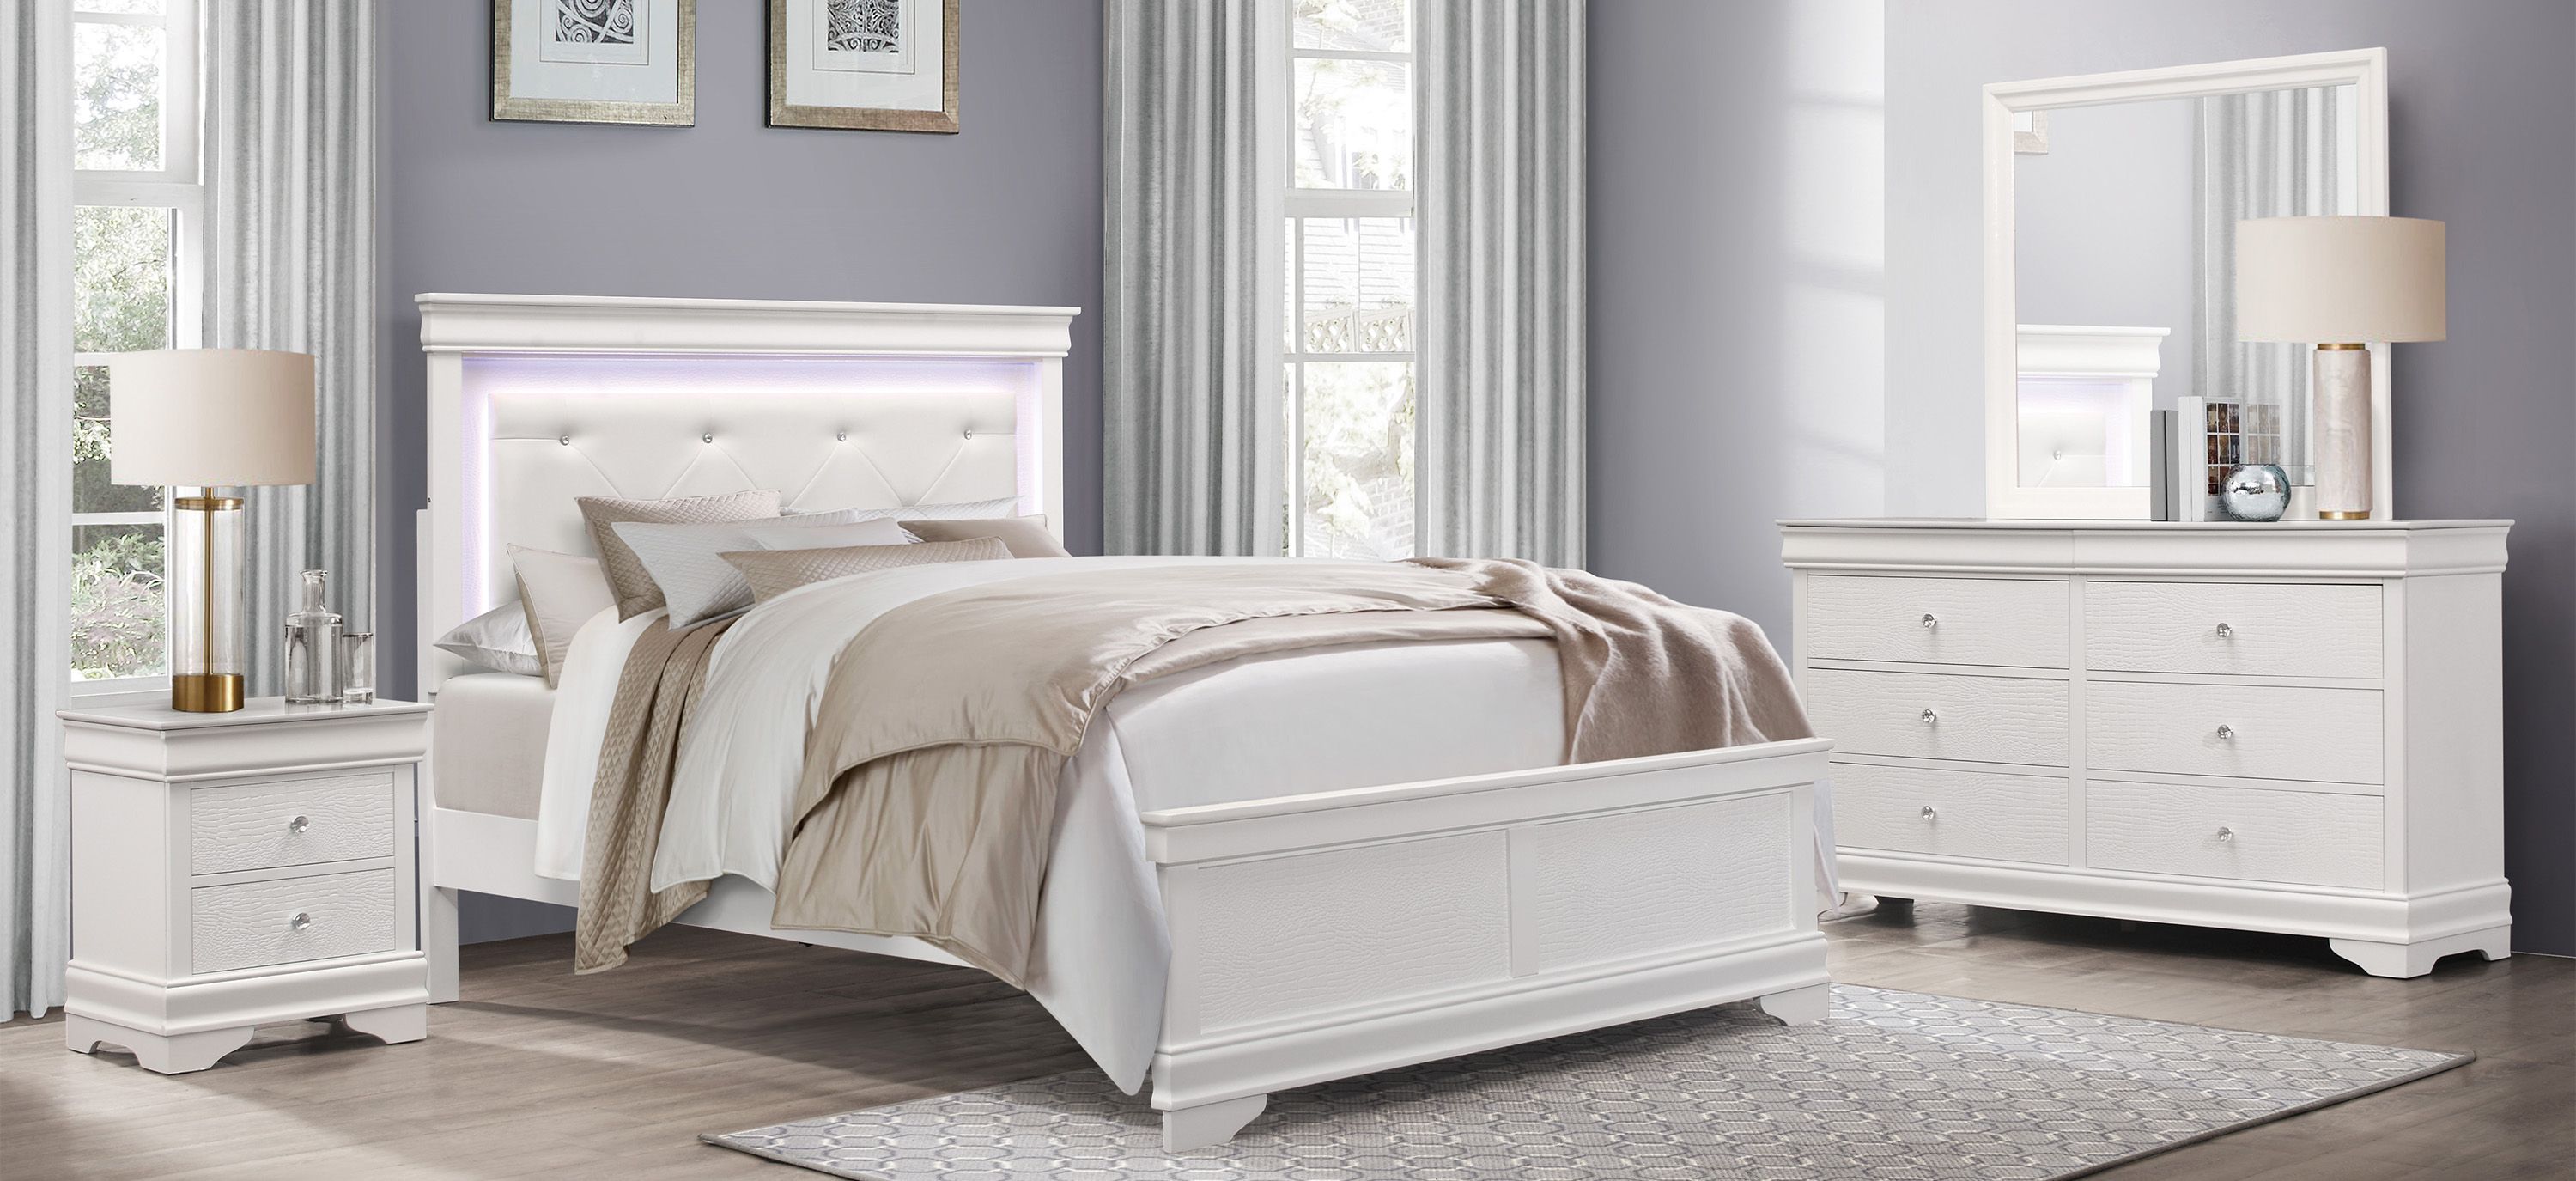 Whiting 4-pc. Upholstered Bedroom Set